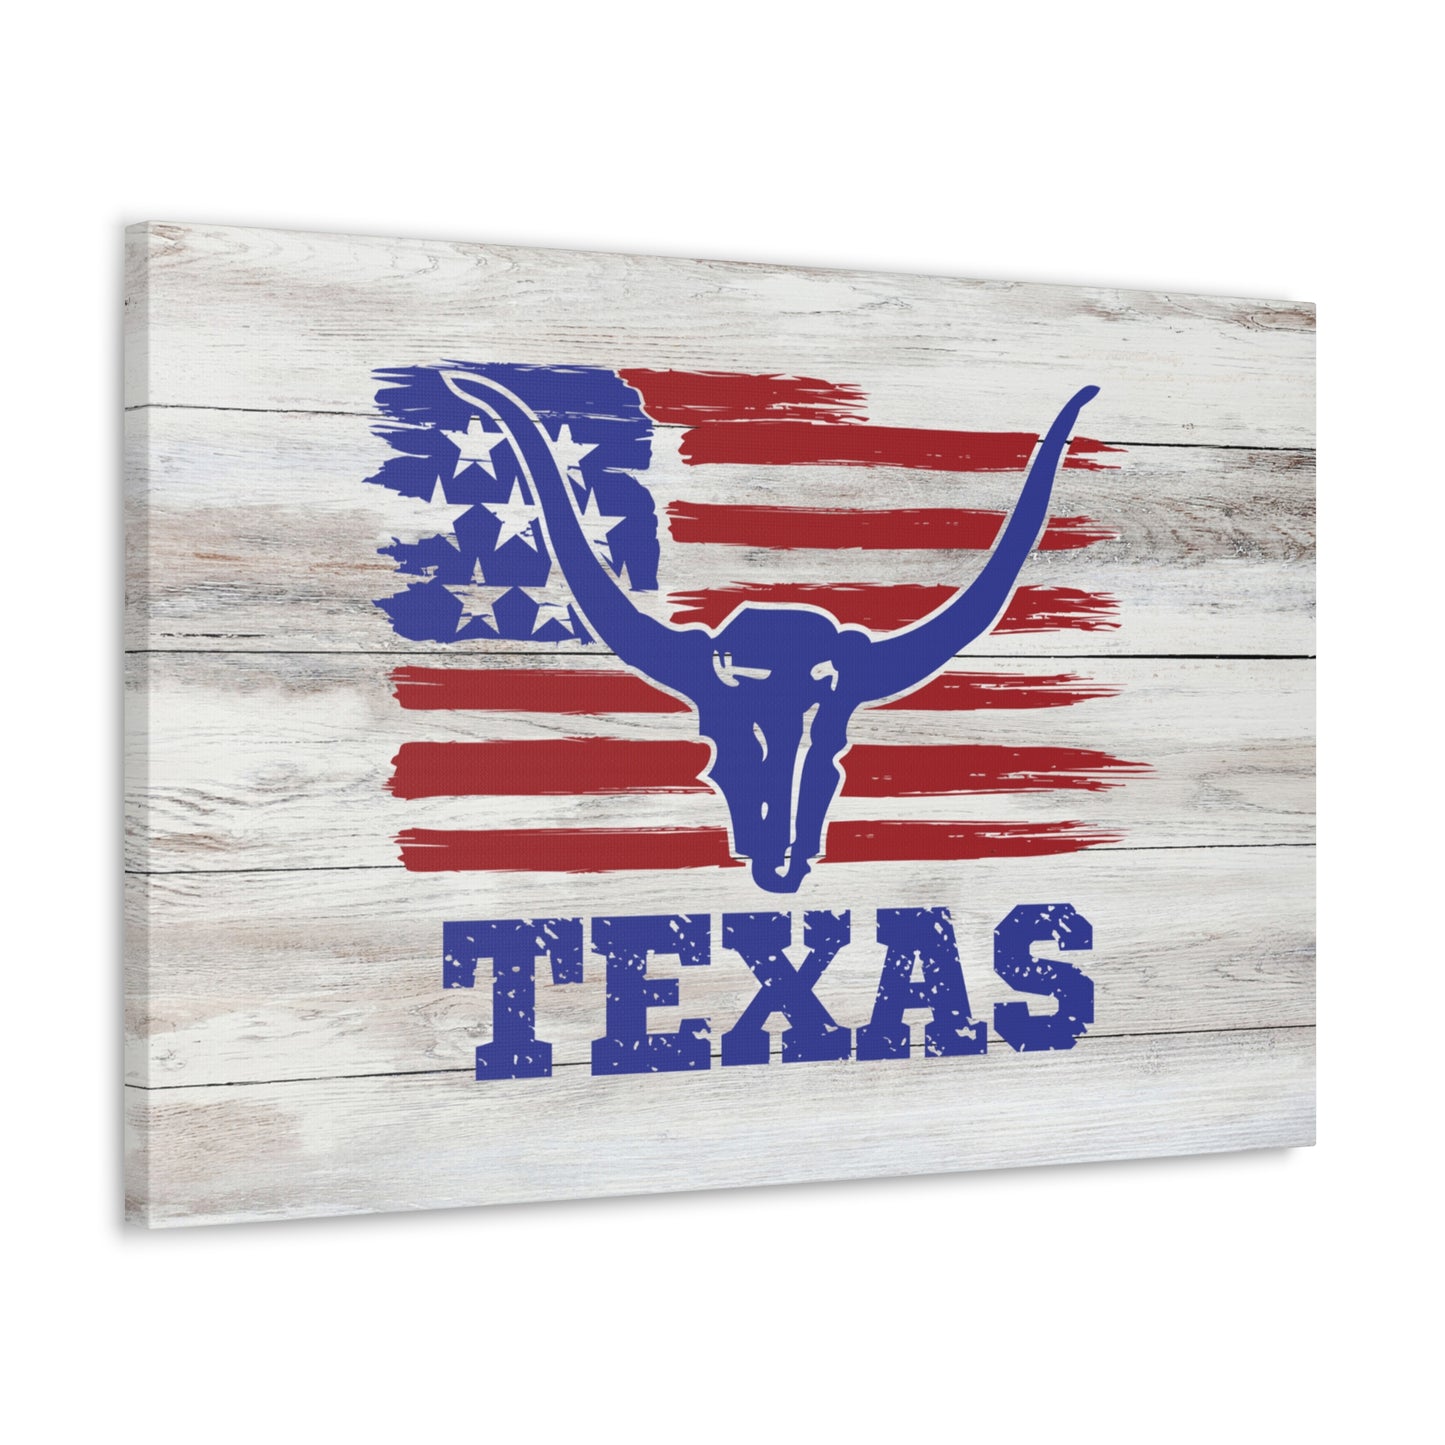 "Texas" Wall Art - Weave Got Gifts - Unique Gifts You Won’t Find Anywhere Else!